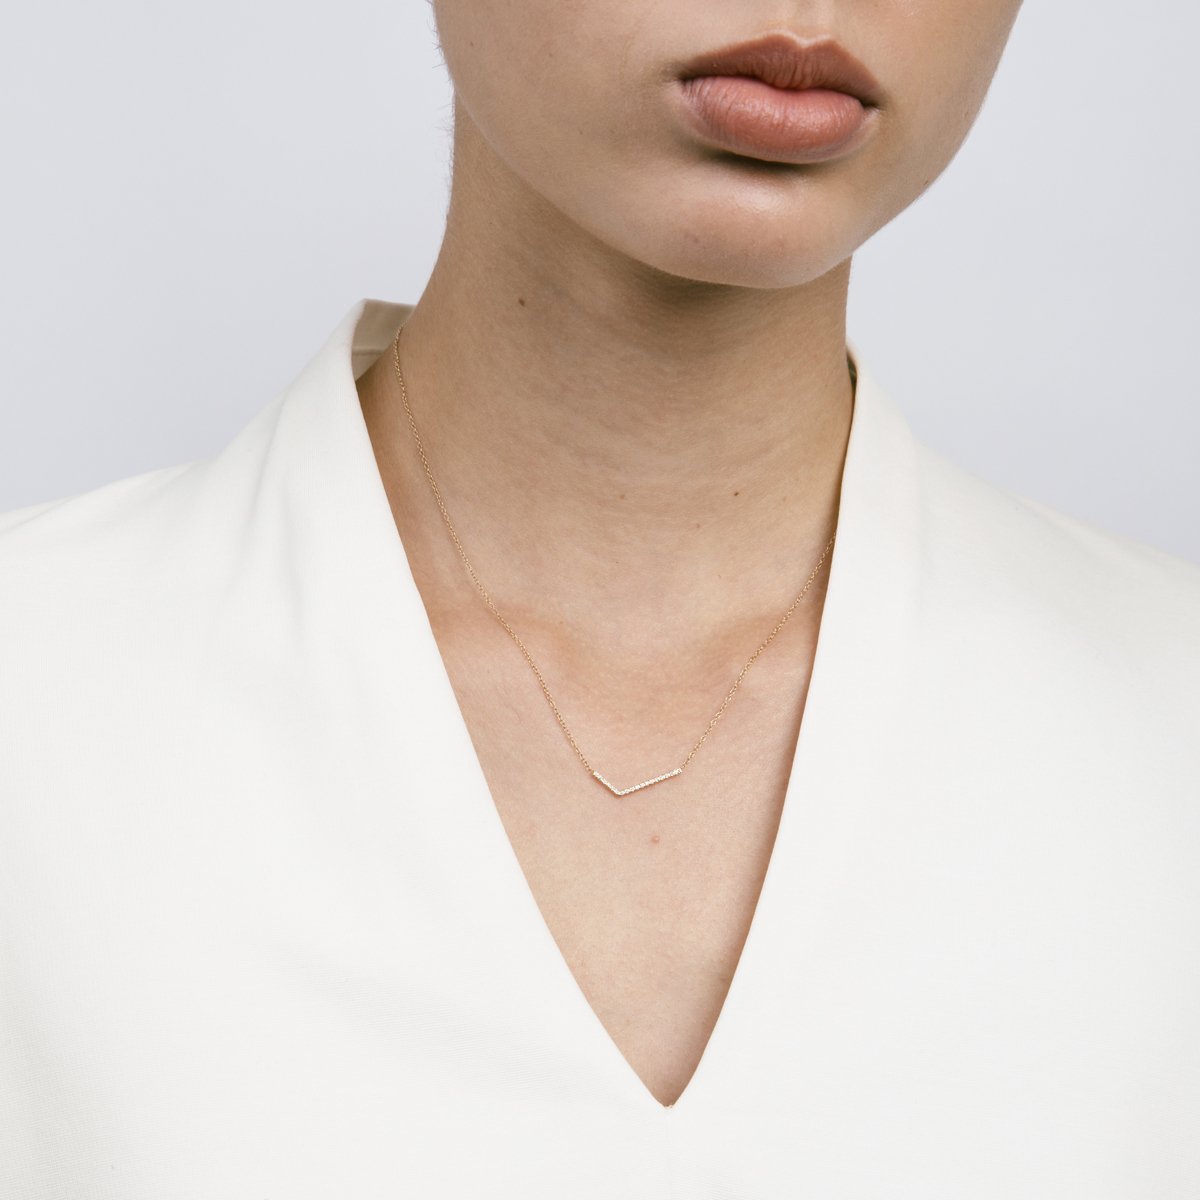 Veva Designer Necklace in 14k Gold set with White Diamonds By SHW Fine Jewelry NYC